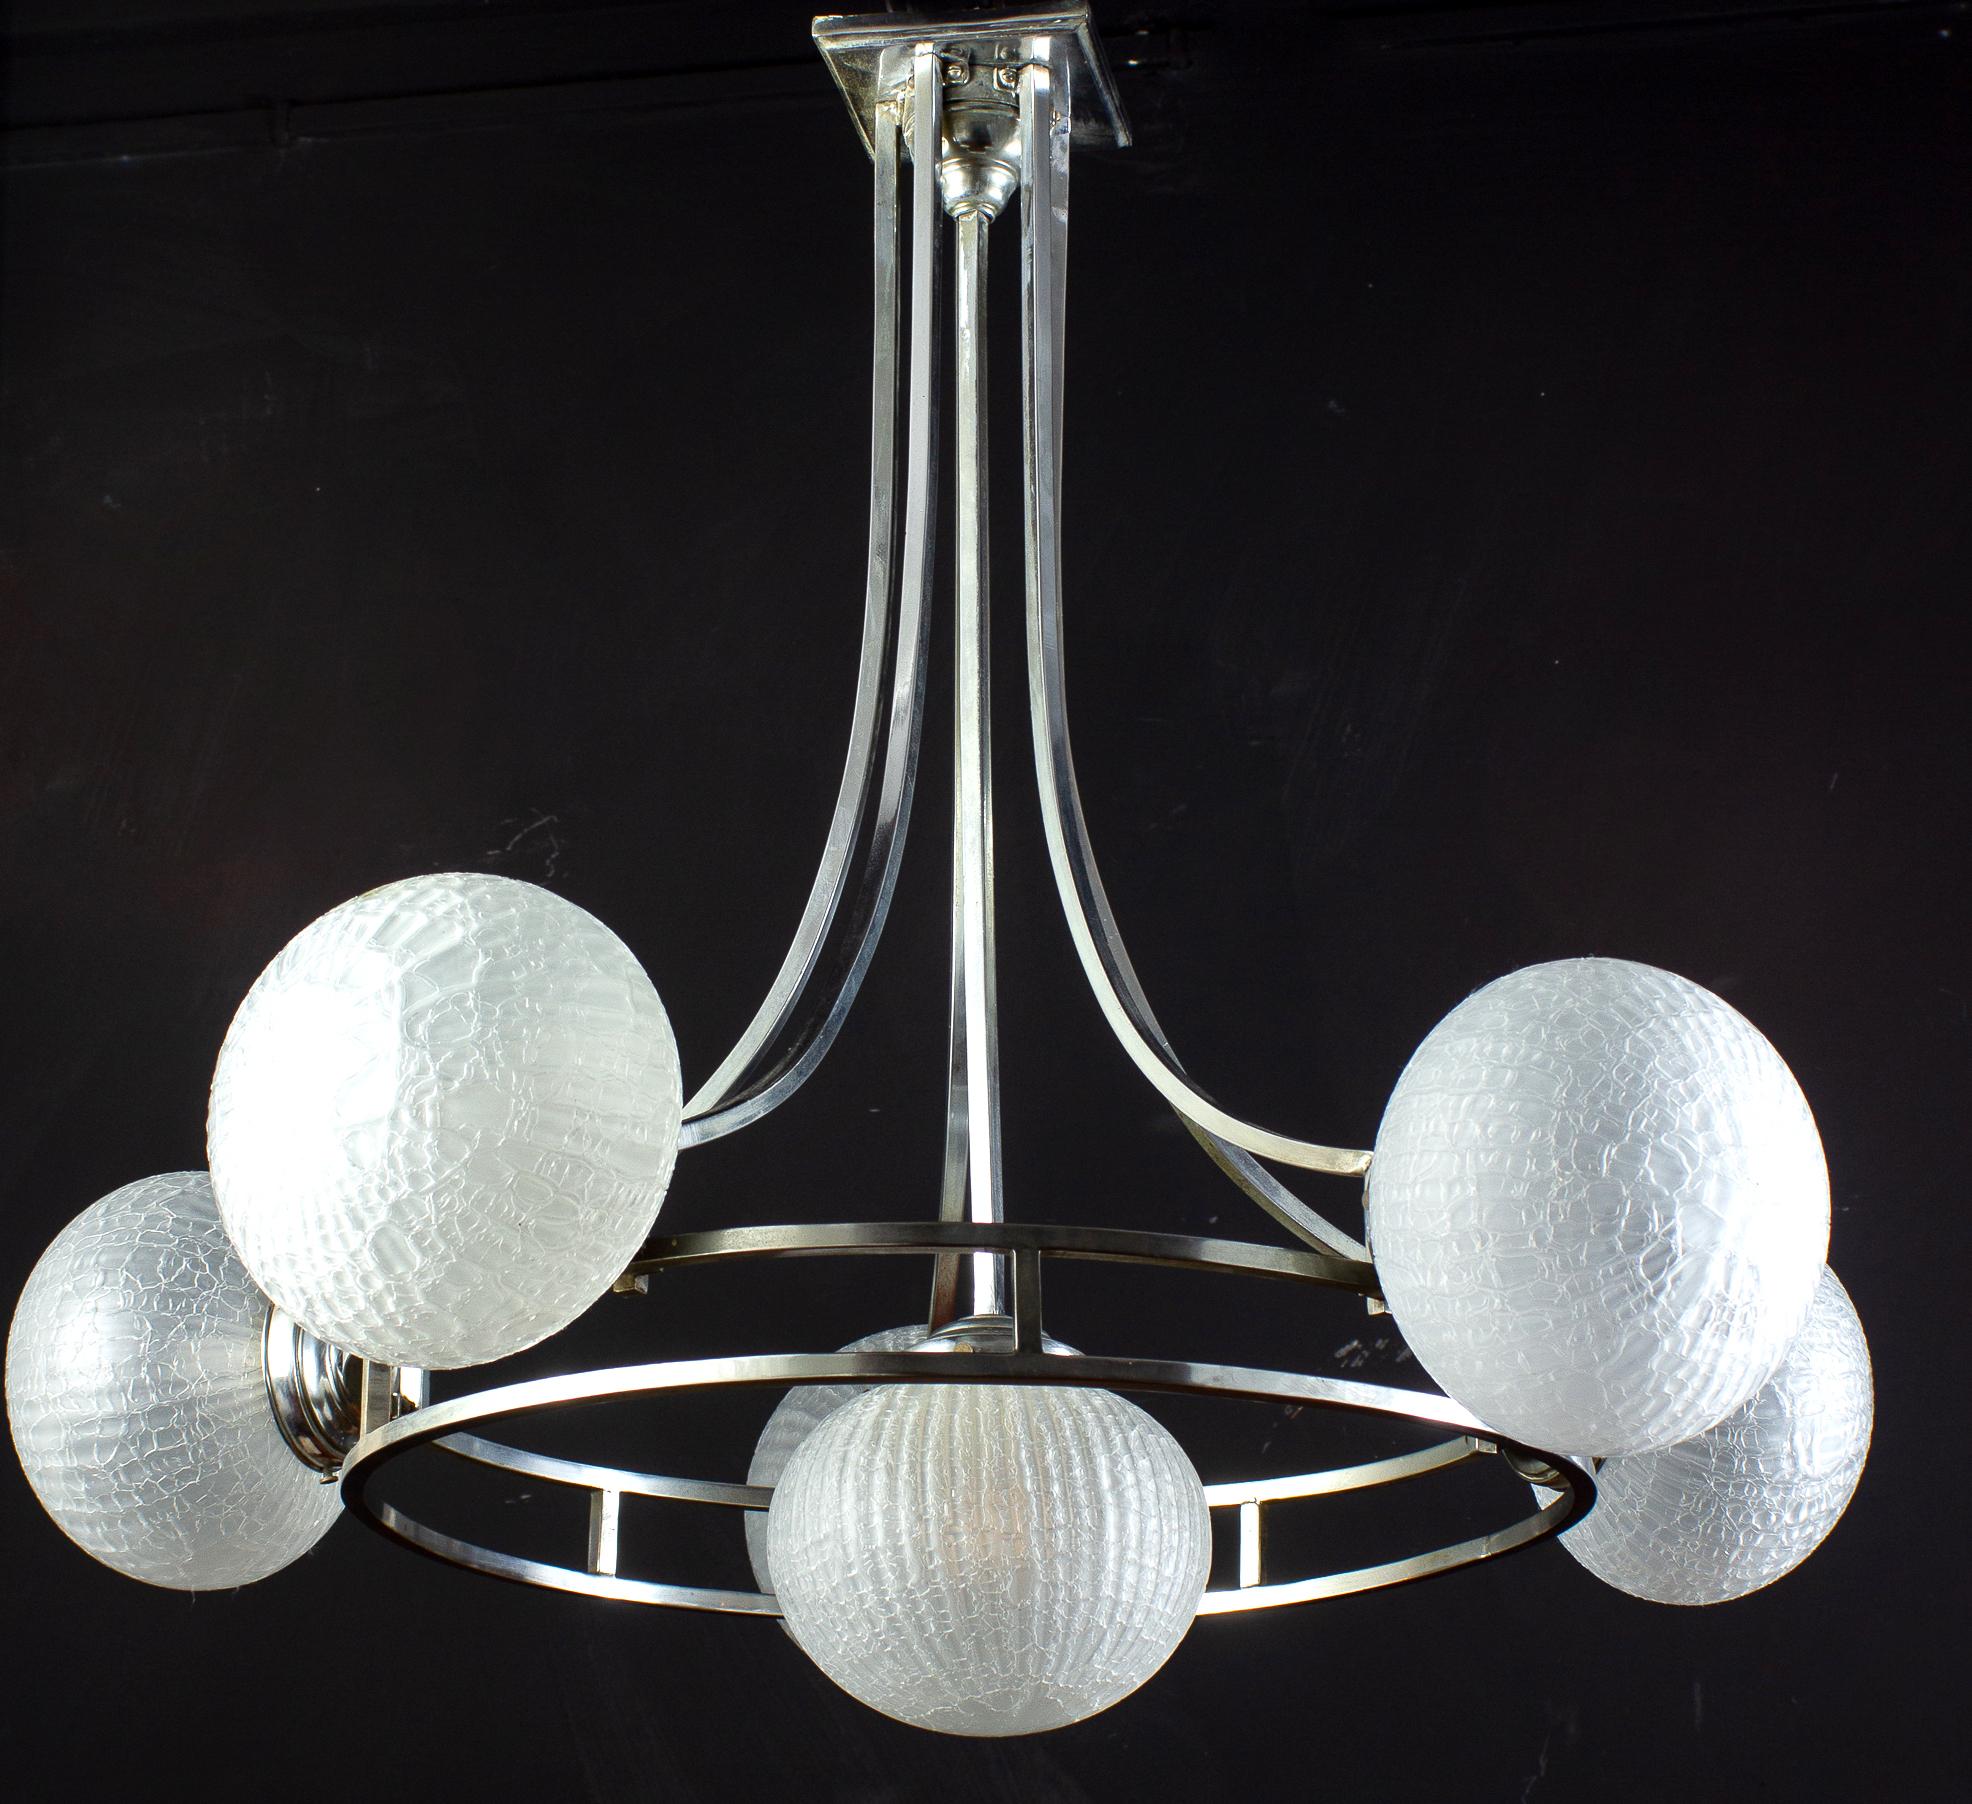 Large chrome structure Sarfatti chandelier, 1960s. Bulbous shaped murano art glass shades with shattered surface effect.
Six E27 light bulbs.